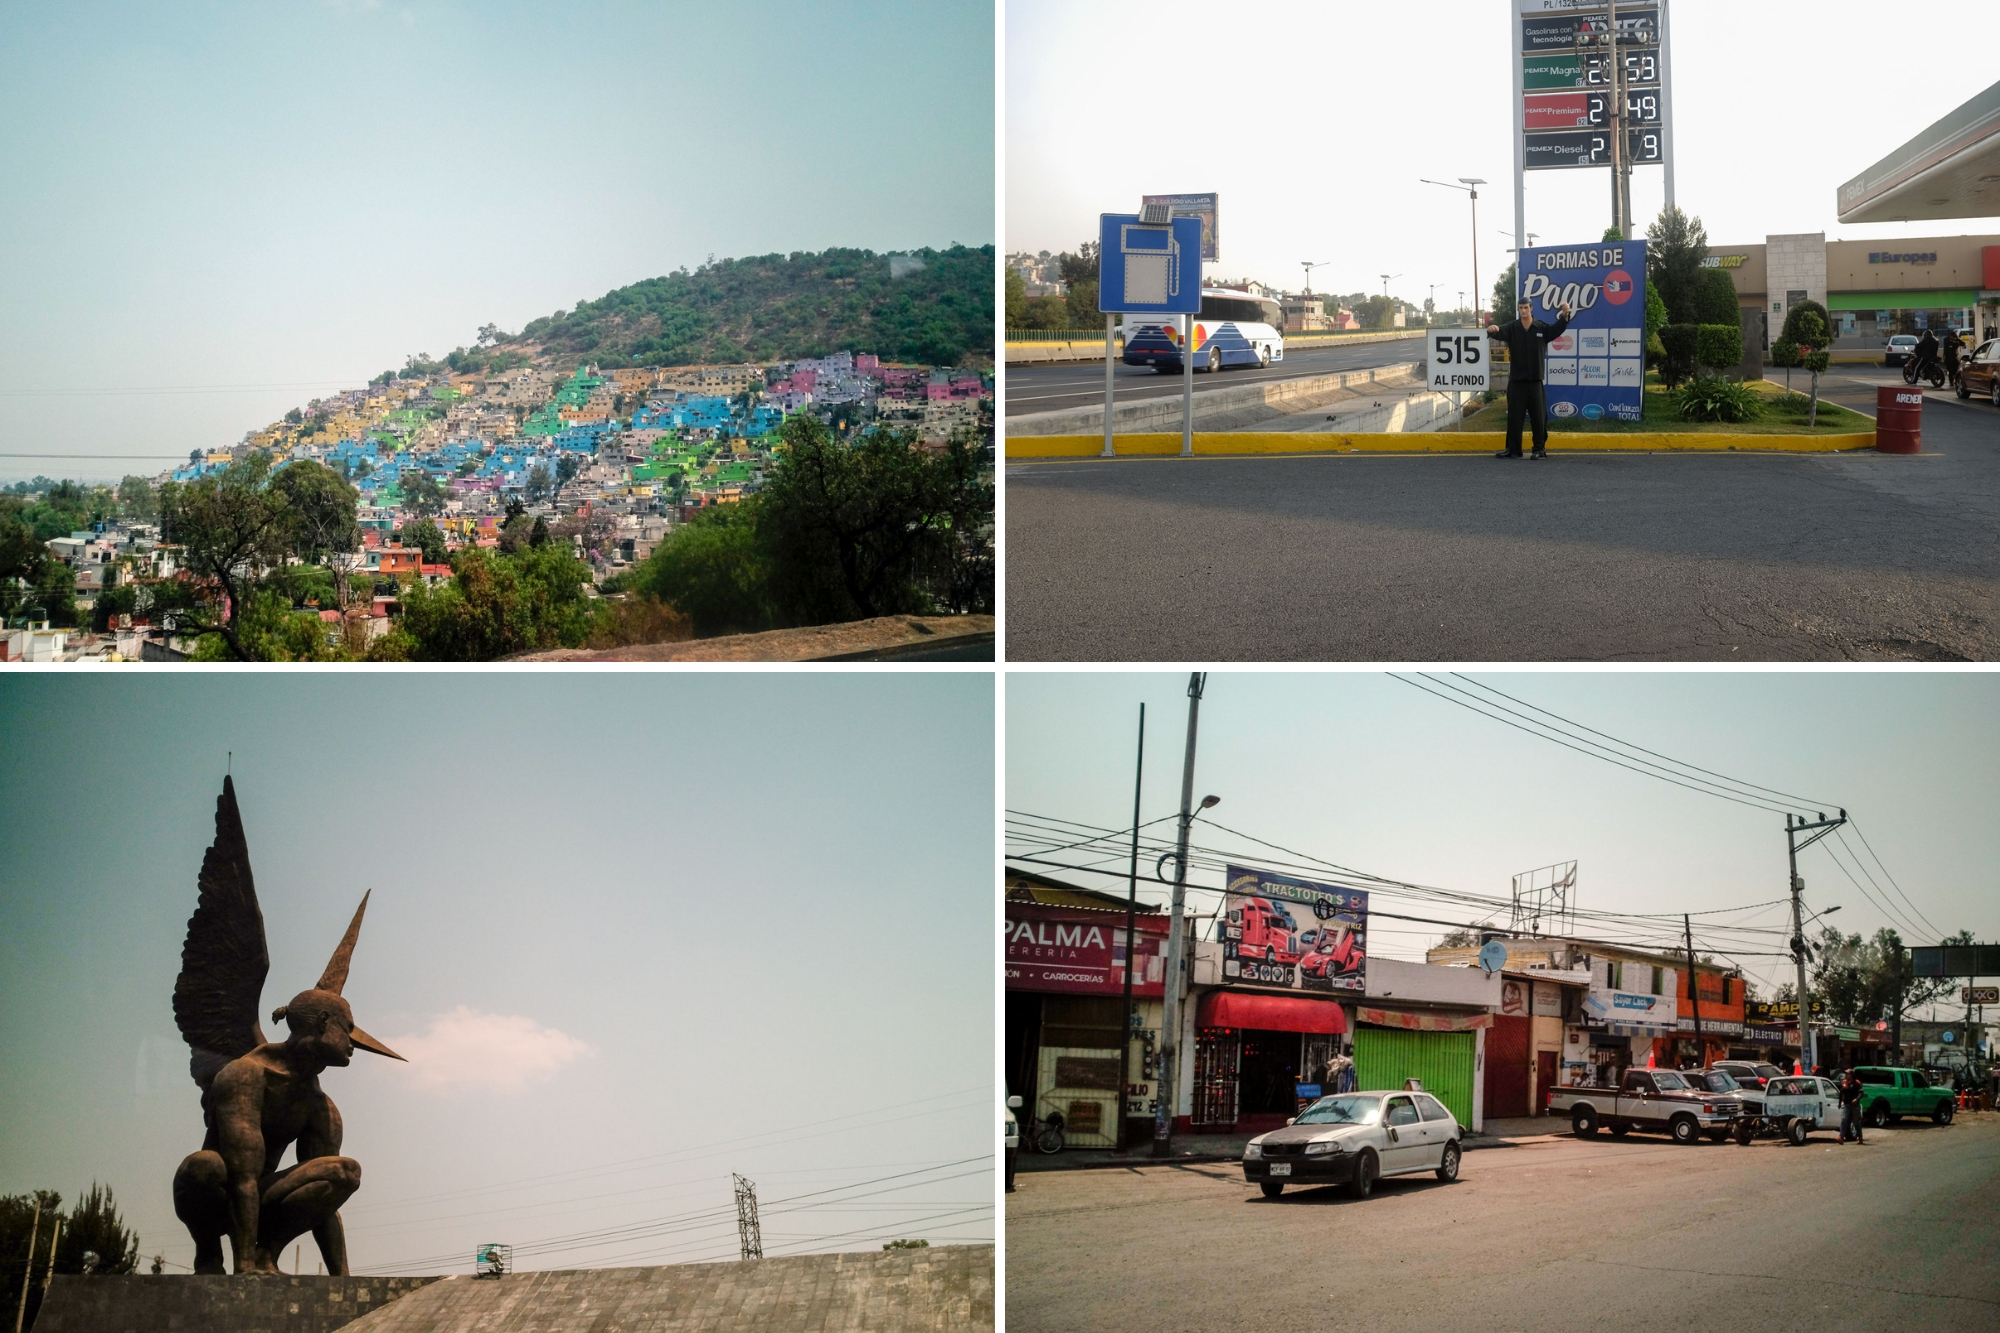 Collage of sights from the drive to teotihuacan like homes, businesses, the gas station, and a statue